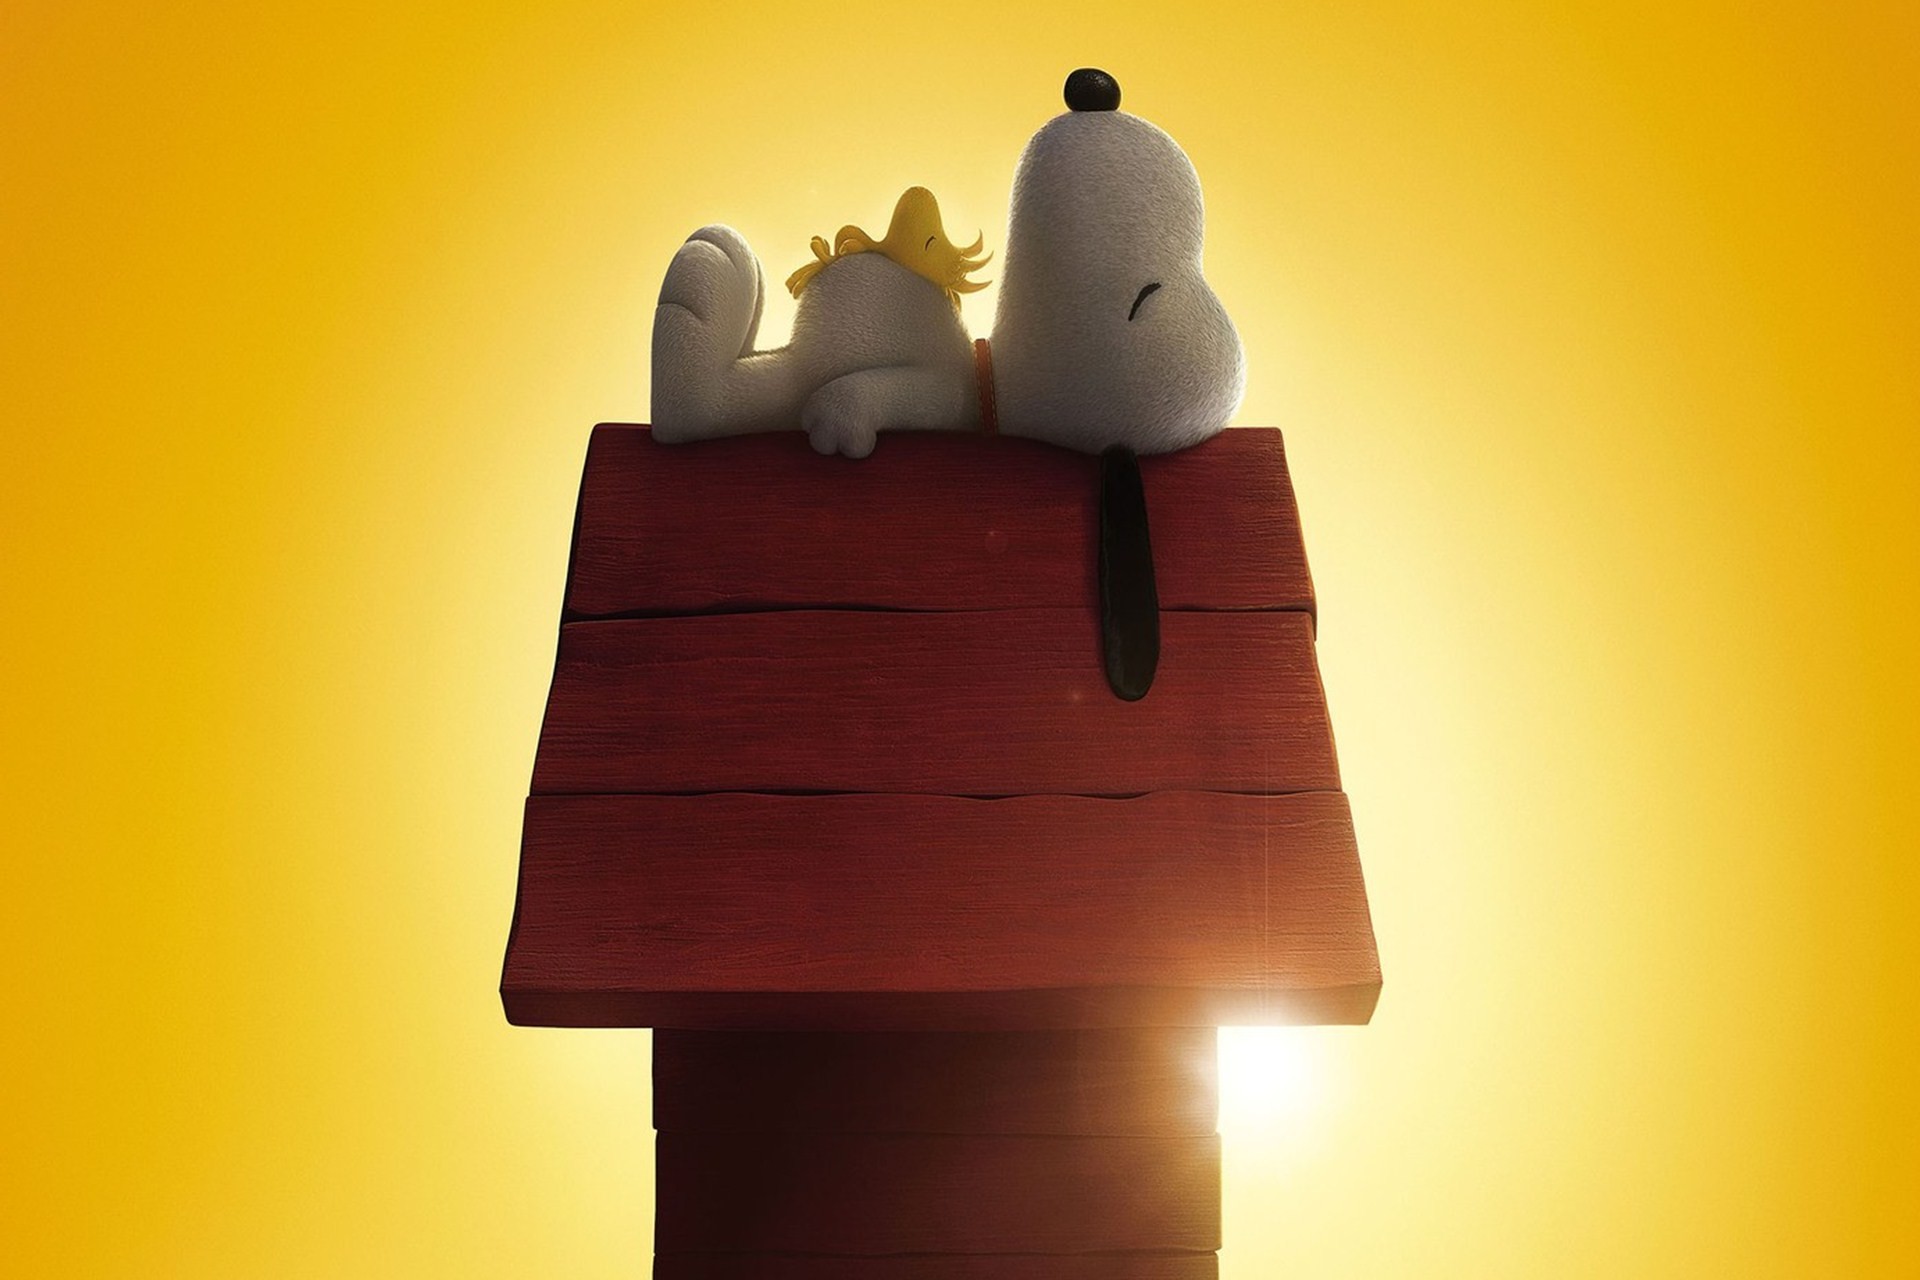 1920x1280 Snoopy And Charlie Brown The Peanuts Stills Hd Wallpaper